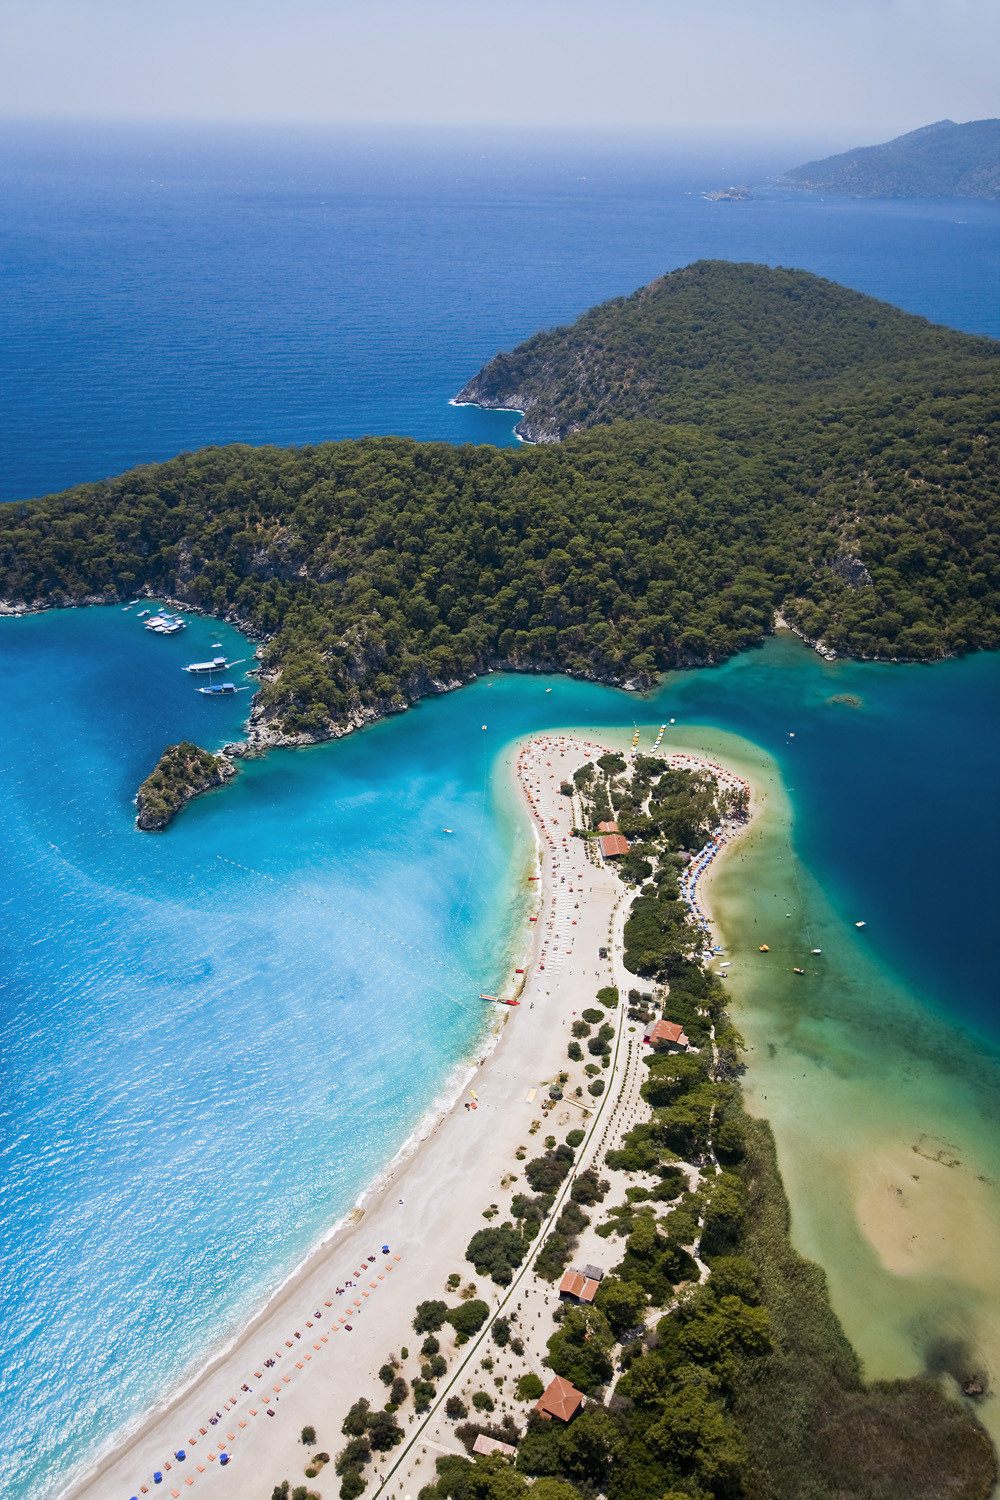 
Best Places to Visit in Fethiye, Turkey